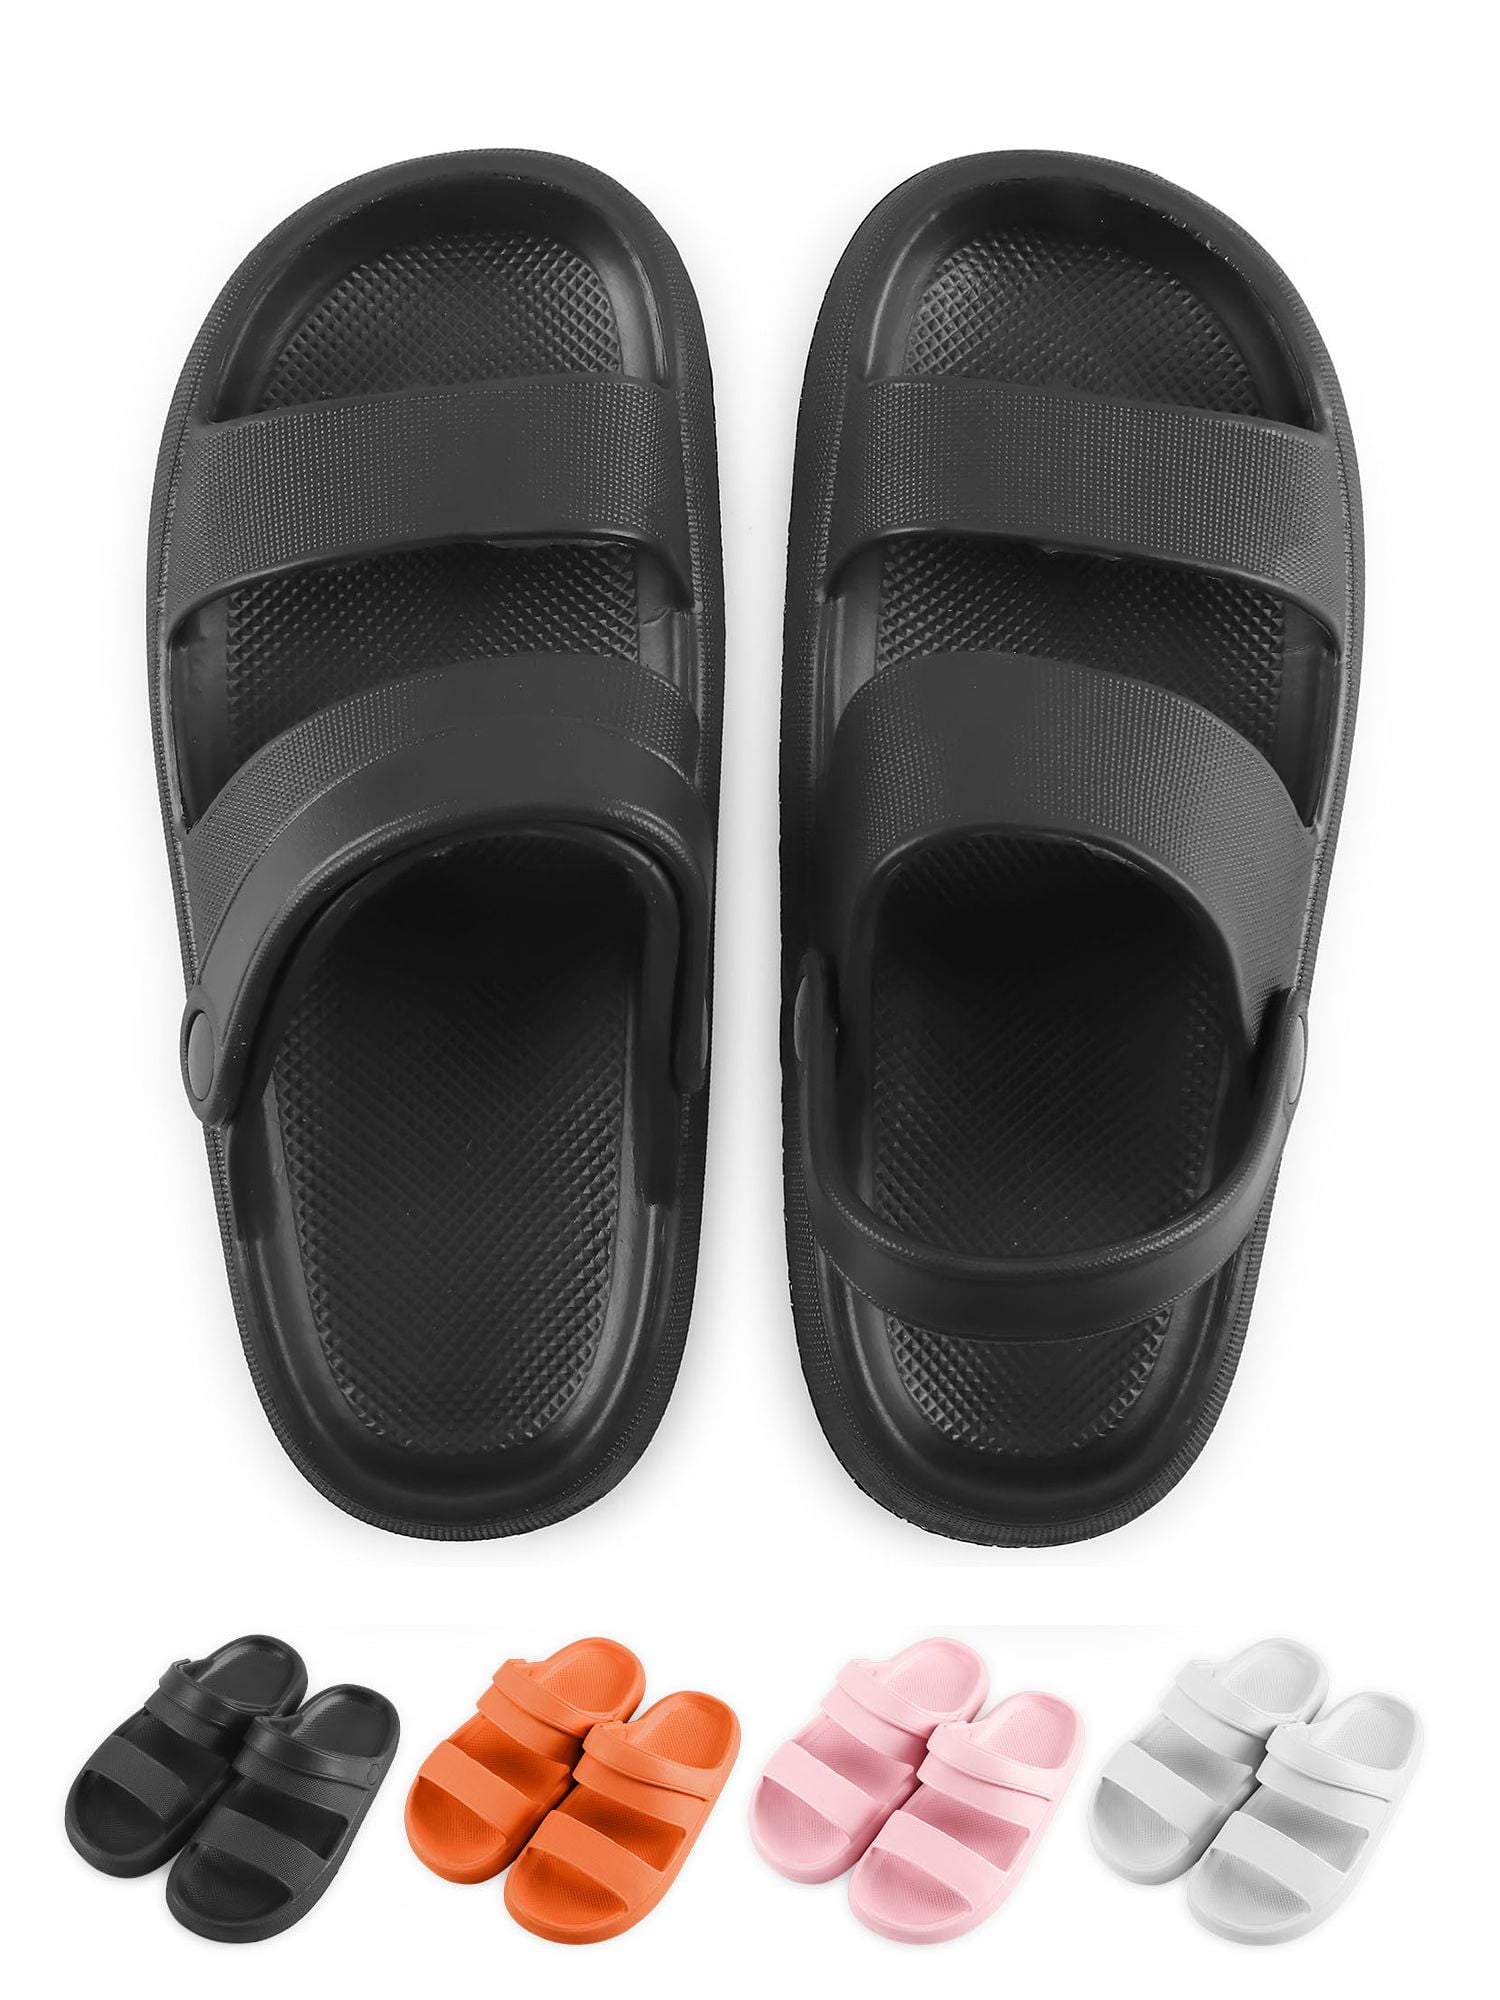 Gustave Anti-Slip Clouds Slippers for Women and Men, Double Strap ...